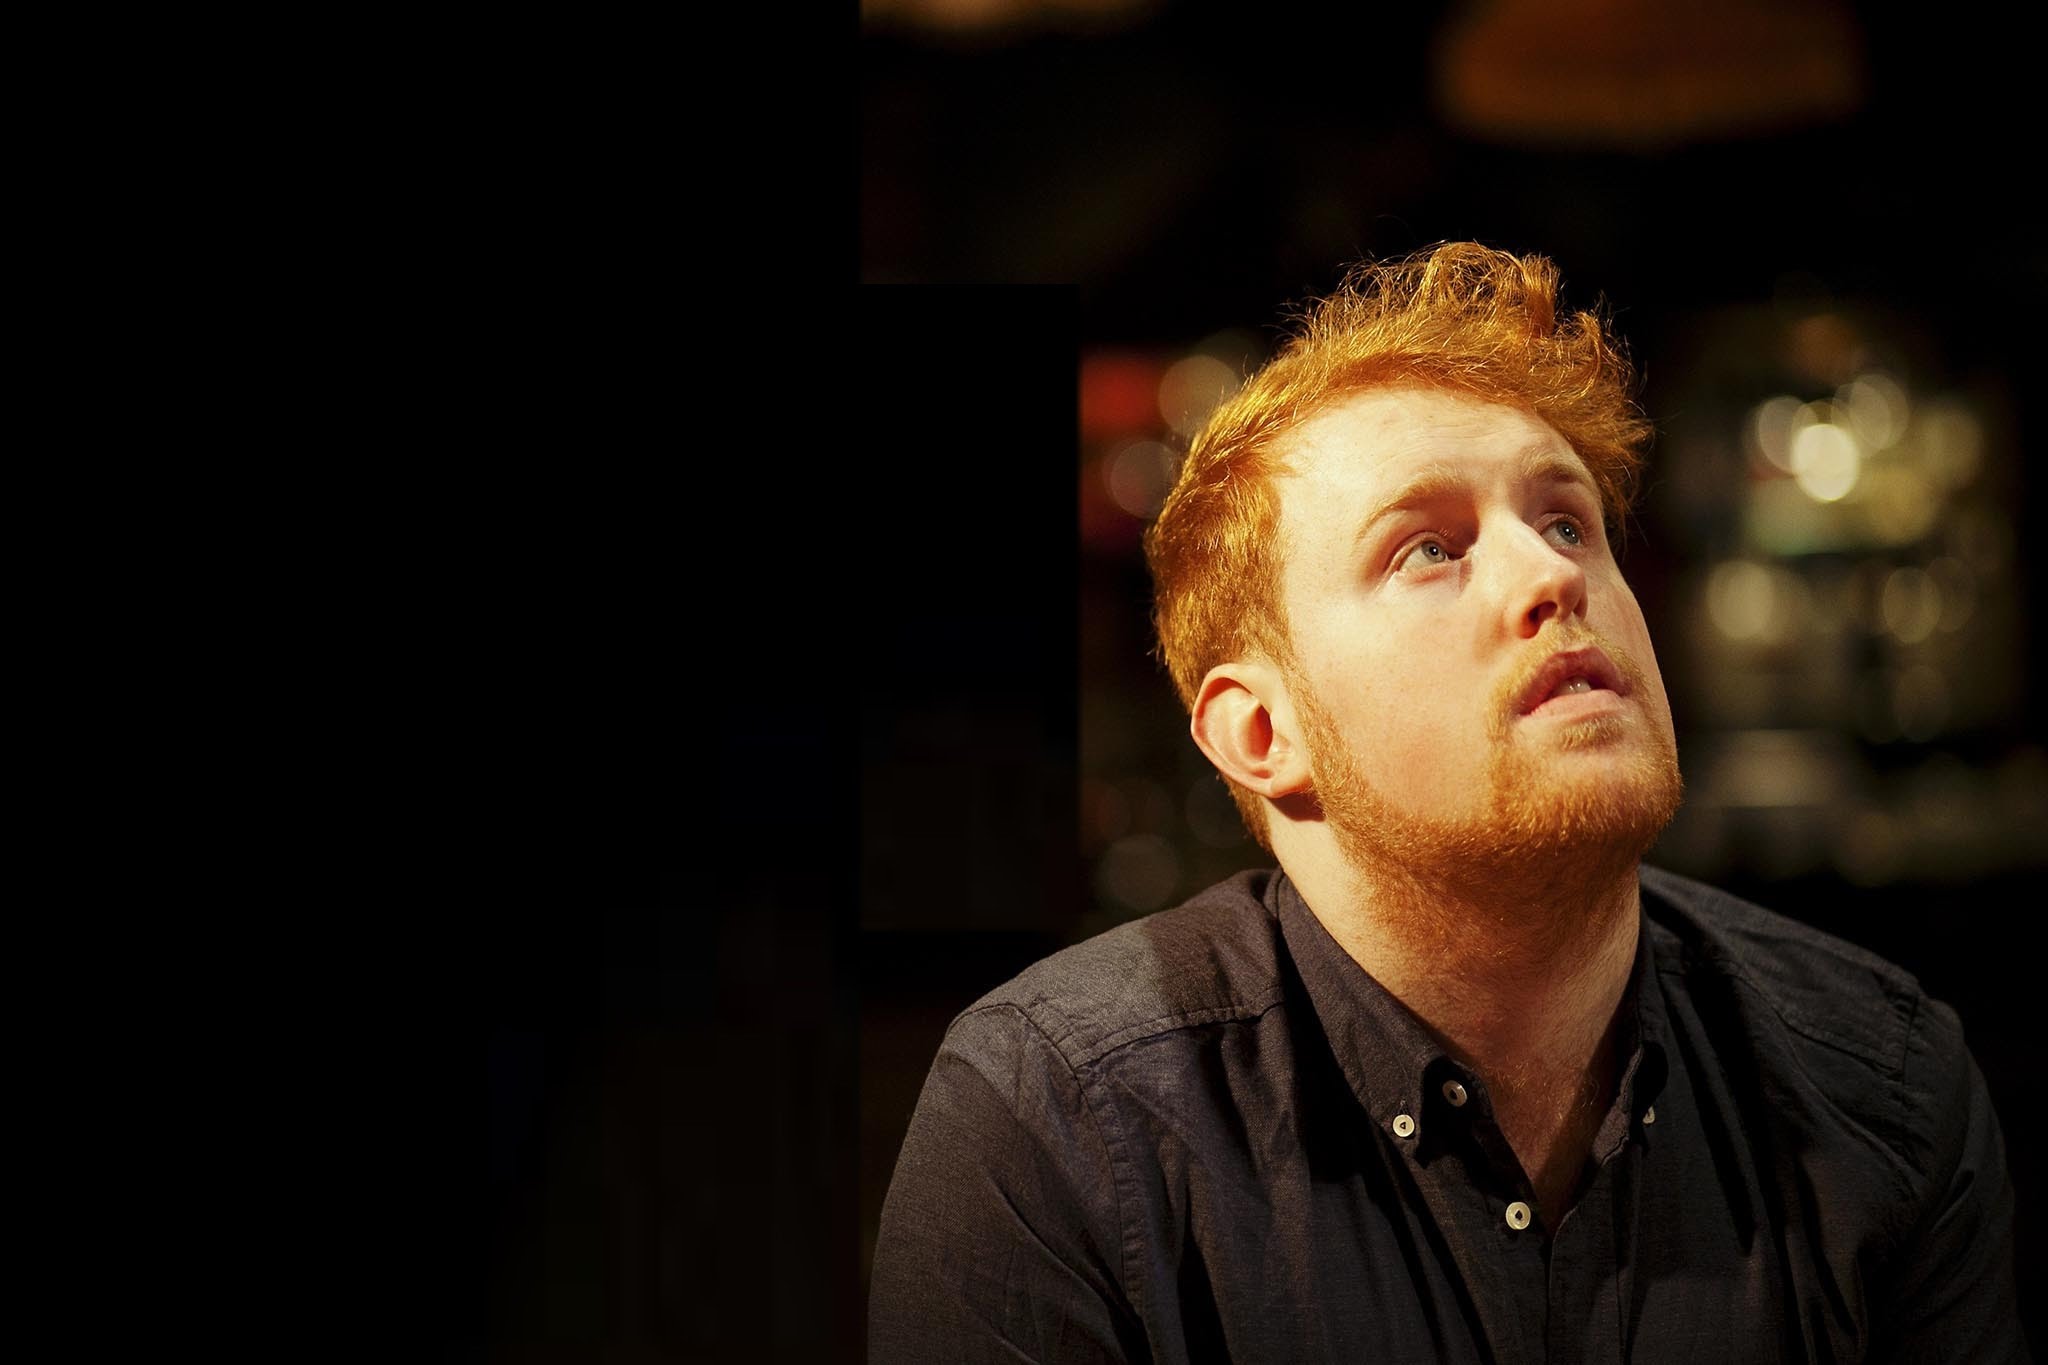 Win tickets to see Gavin James live in Berlin